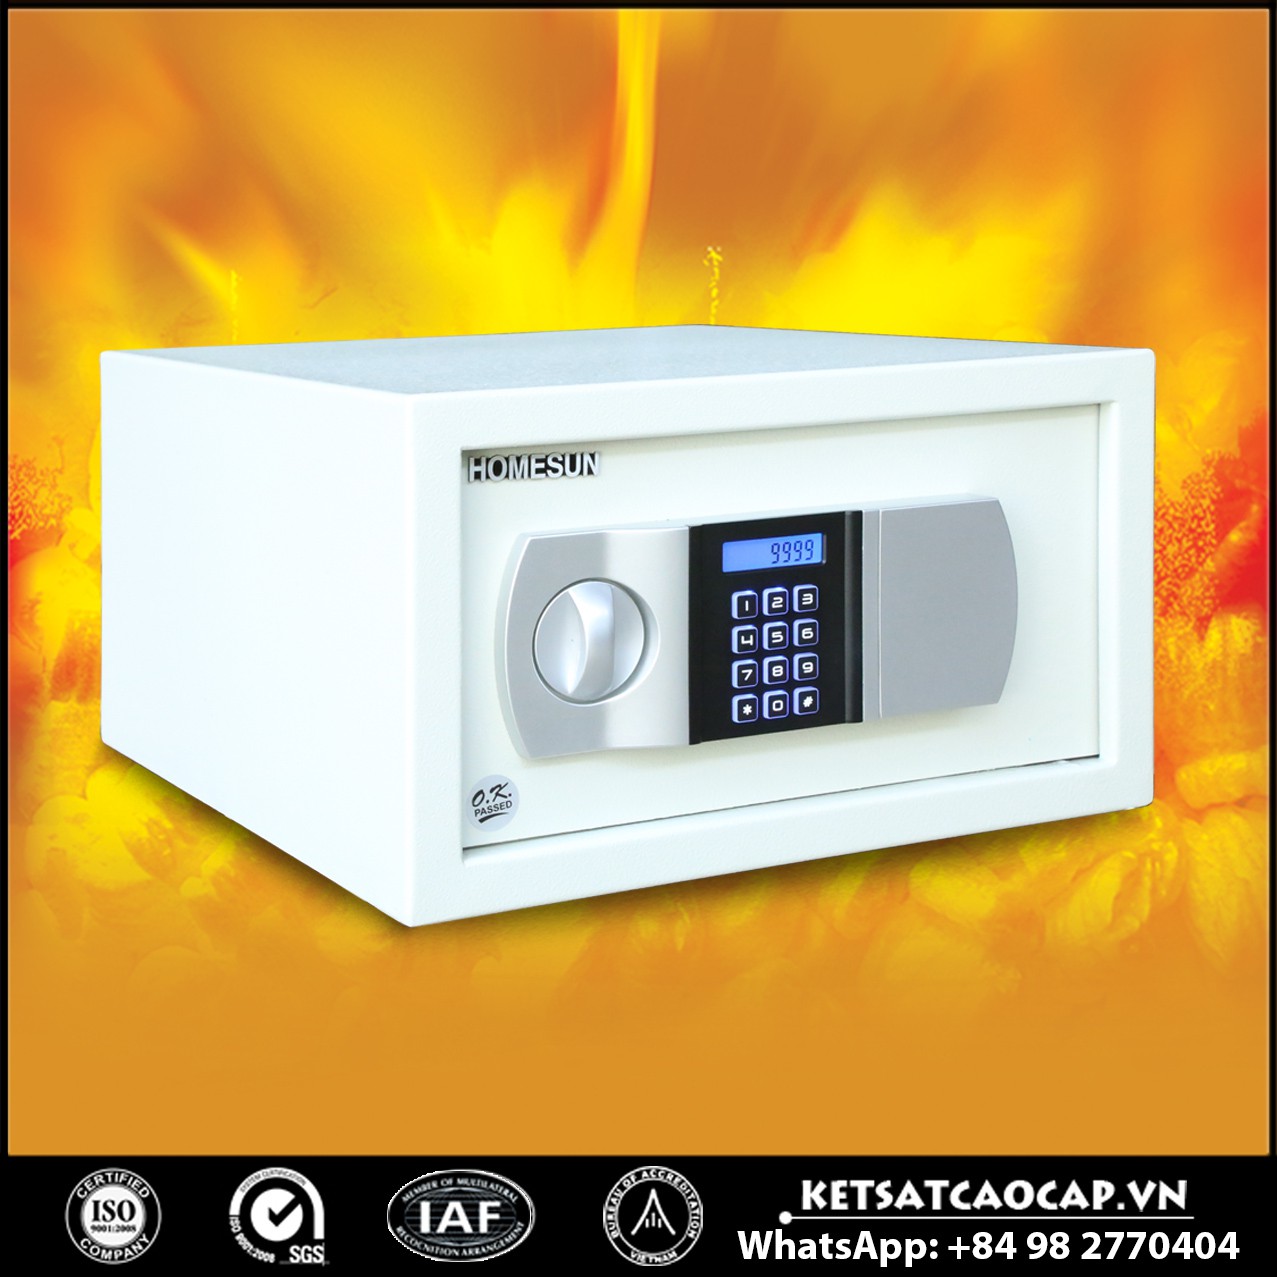 Hotel Safe Dimensions Manufacturers